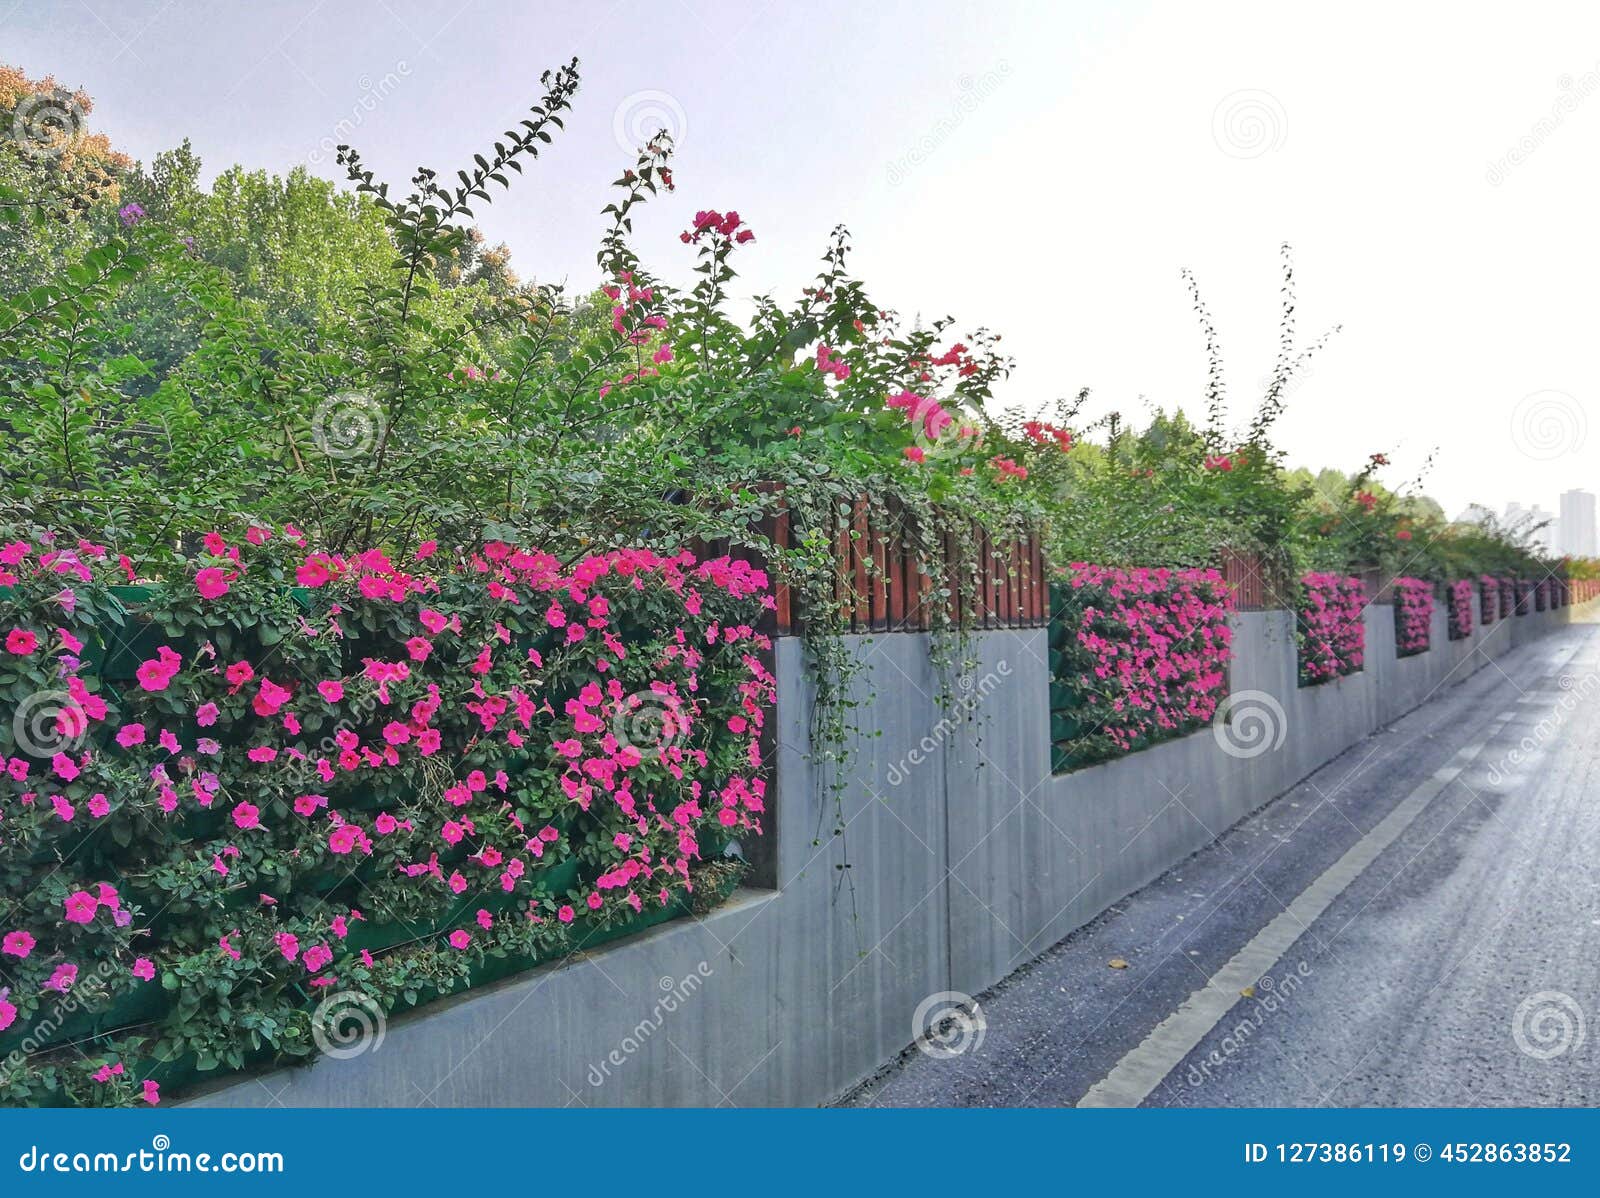 Gardening Vertical Landscape Flower Wall At The Side Of The Road